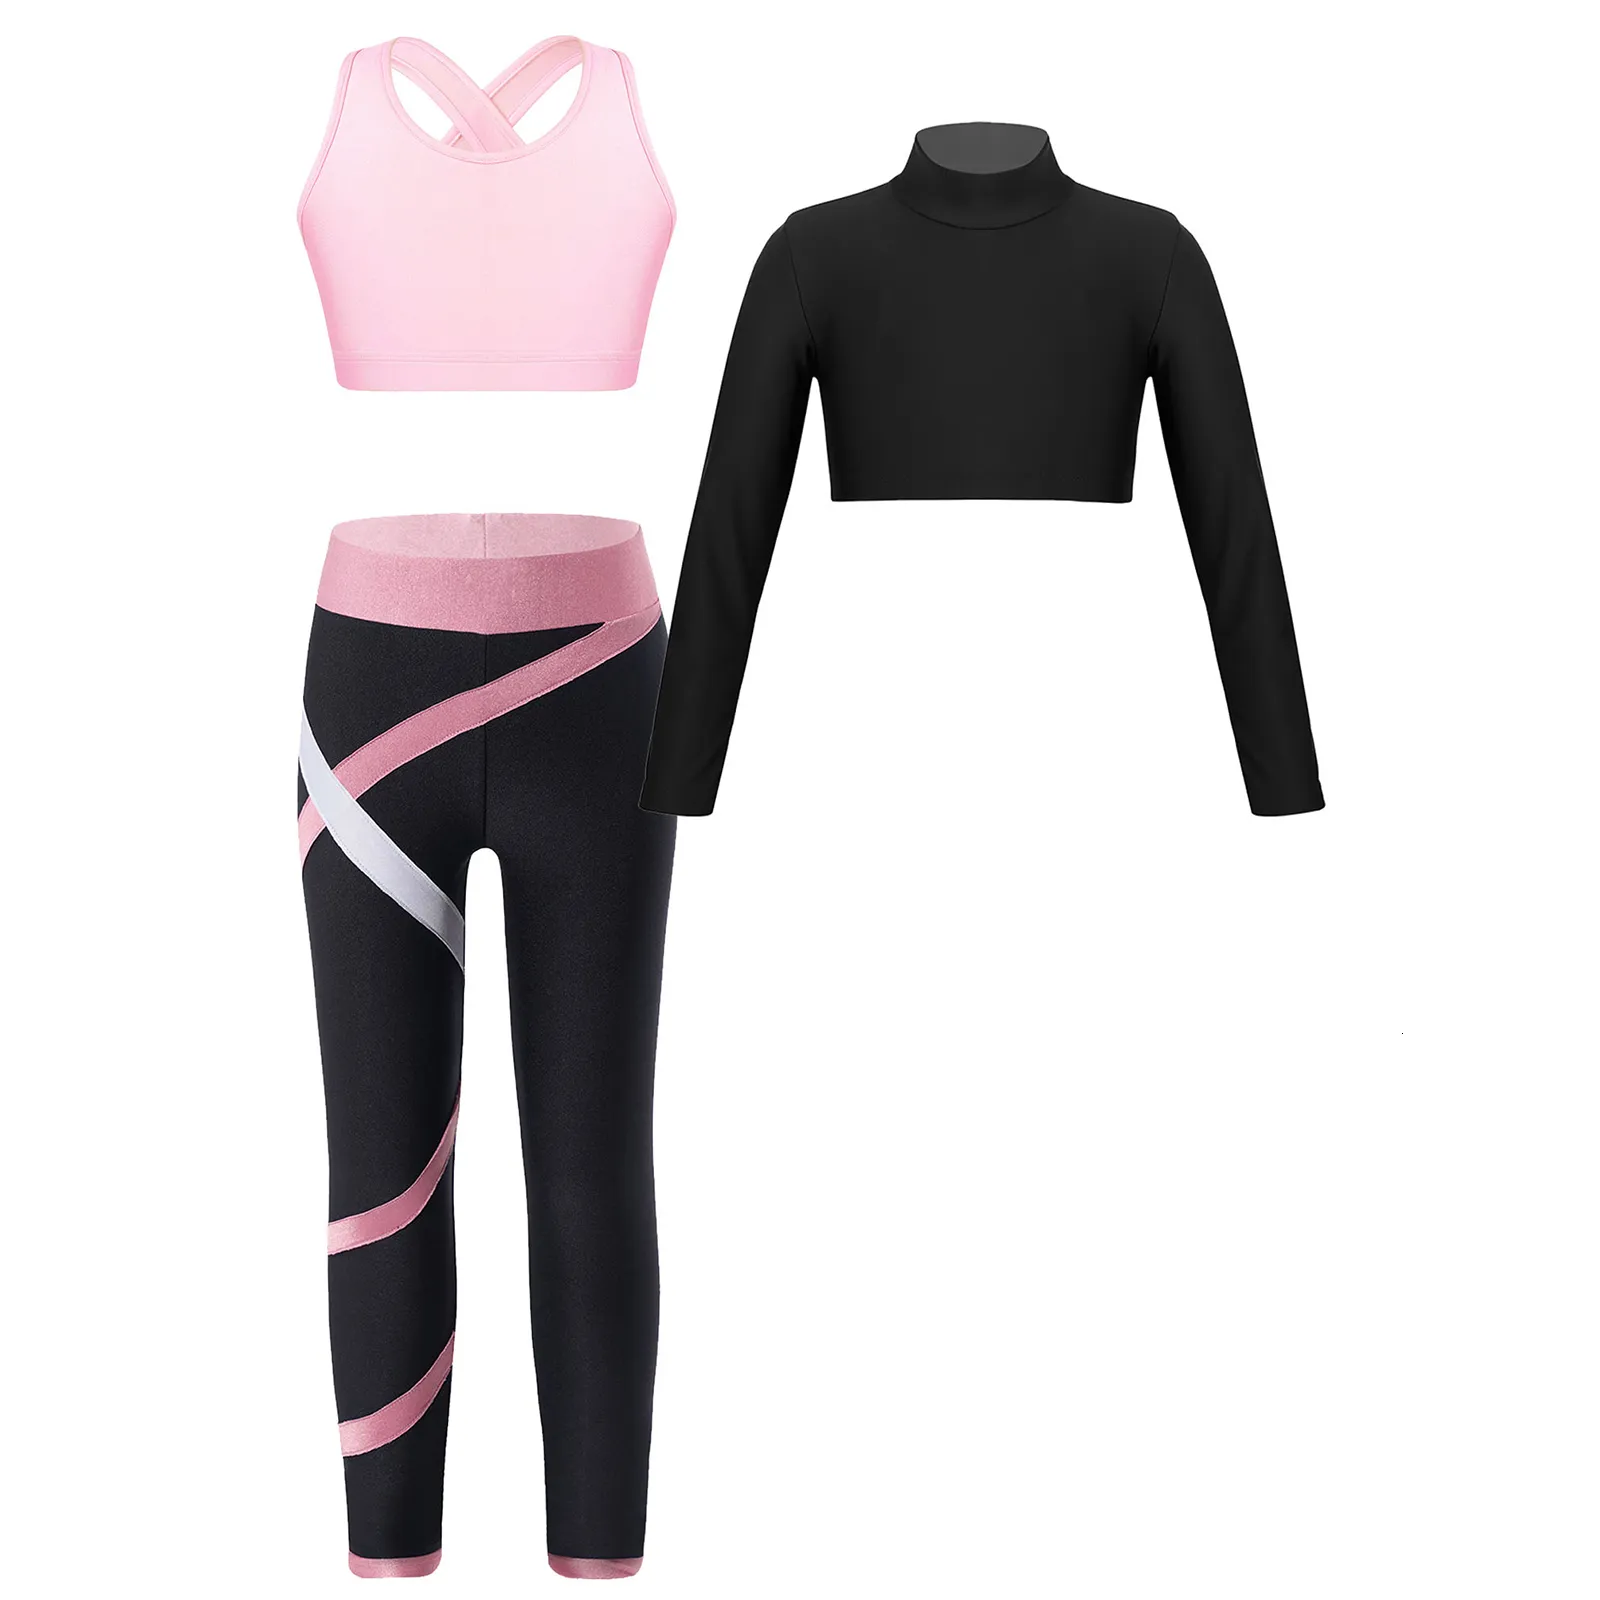 Girls High Pulse Yoga Set For Ballet, Gymnastics, And Fitness Tracksuit  With Performance Fitness And Running Clothes From Nan08, $19.82